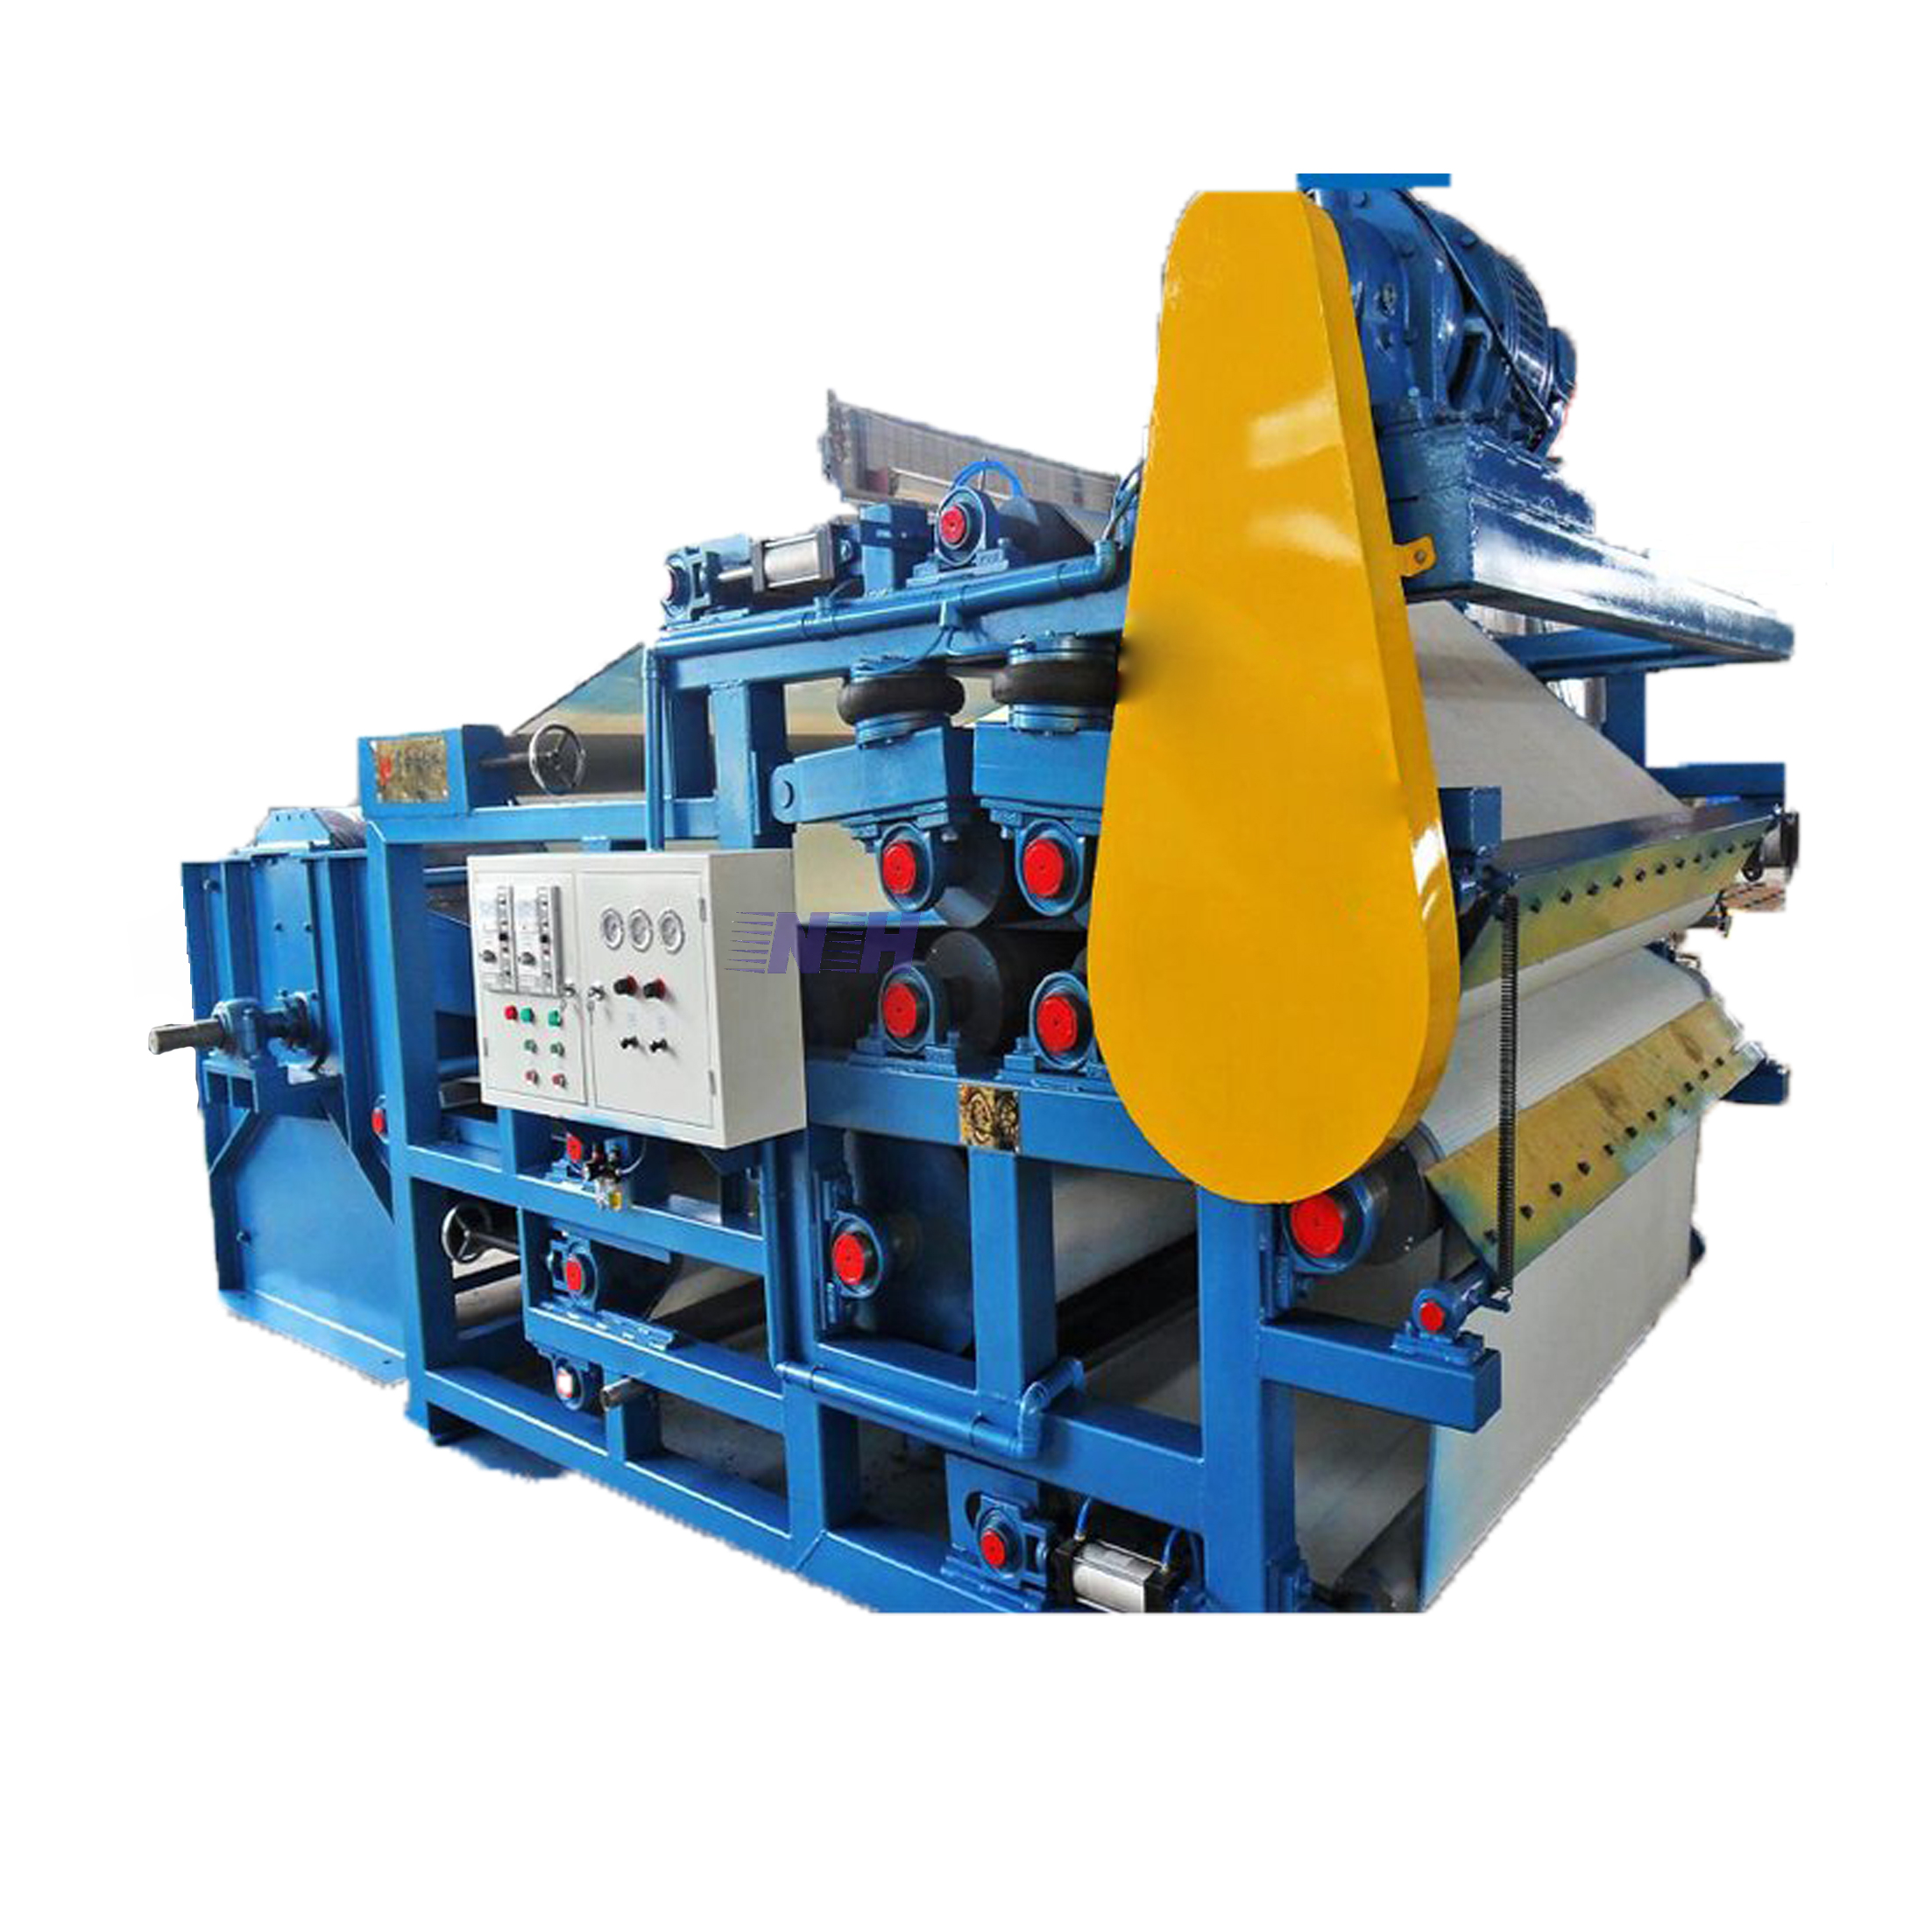 Sludge dewatering equipment by double polyester thickening belt filter textile press for paper pulp waste recycling machine